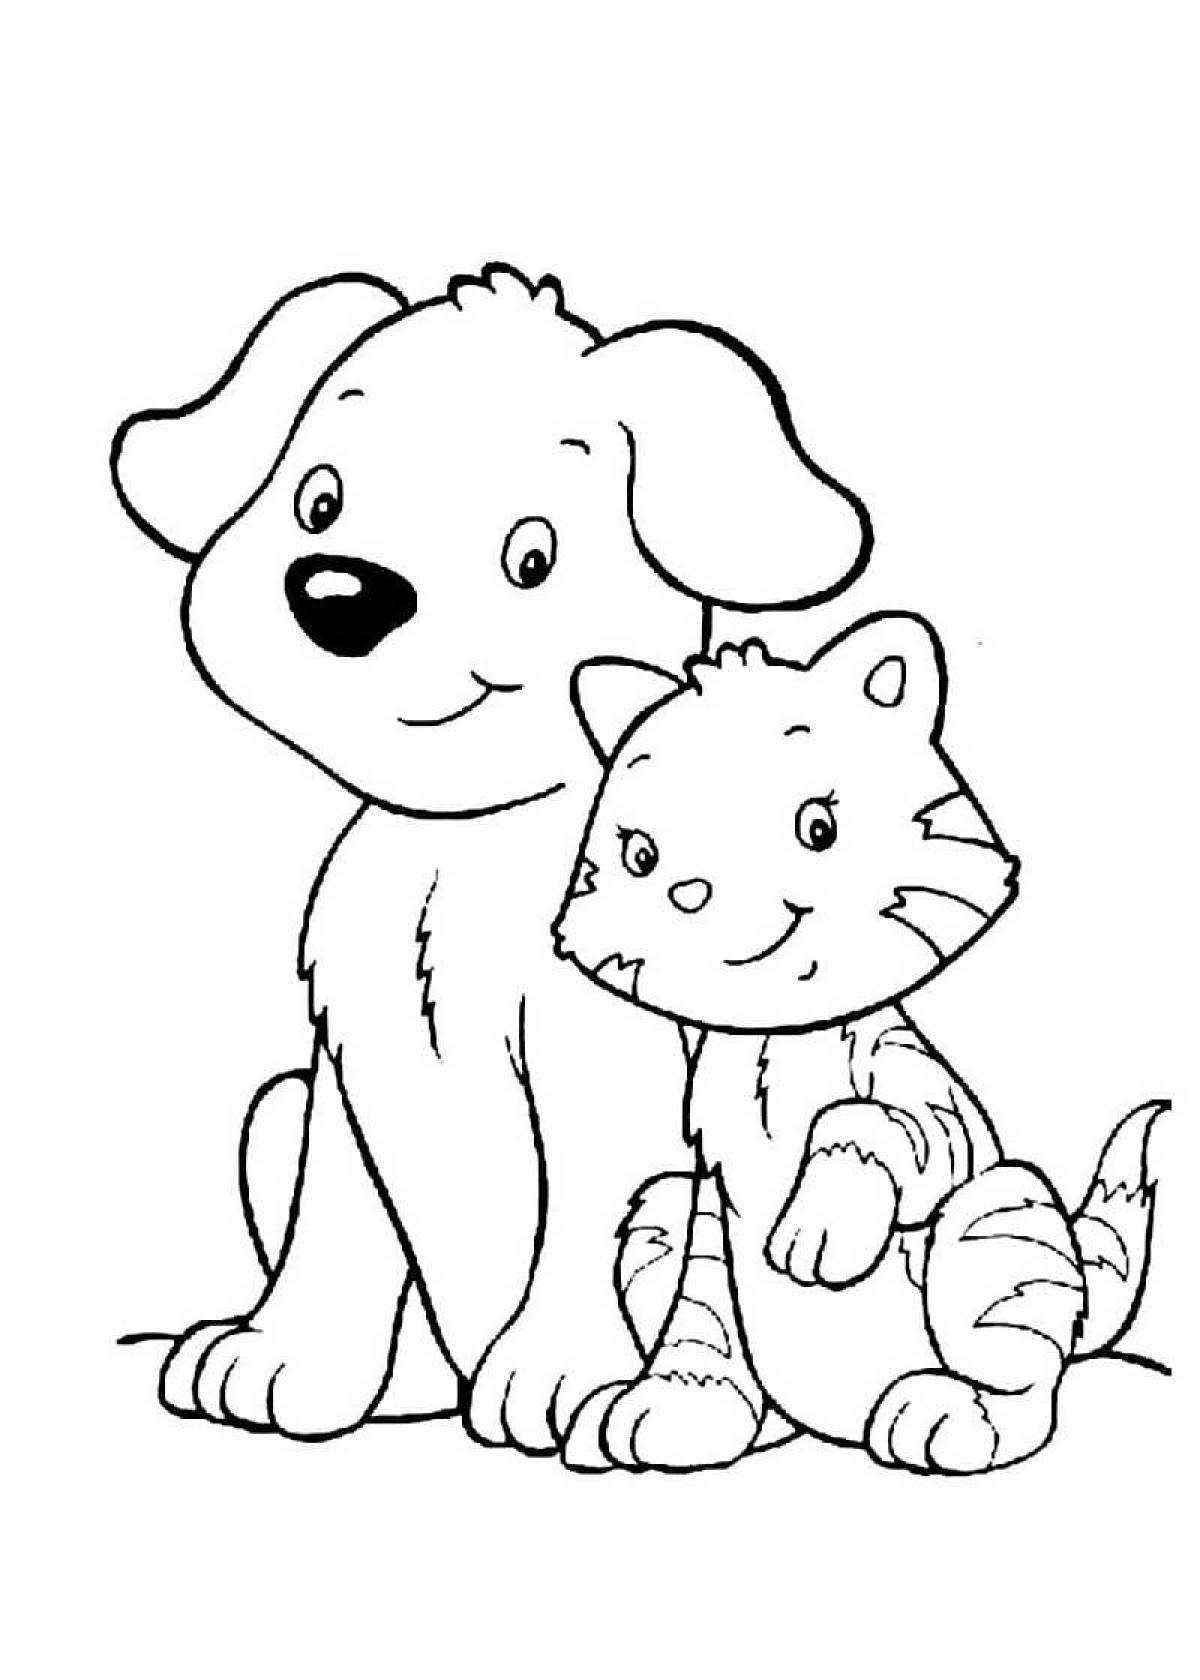 Coloring page of sociable dogs and cats